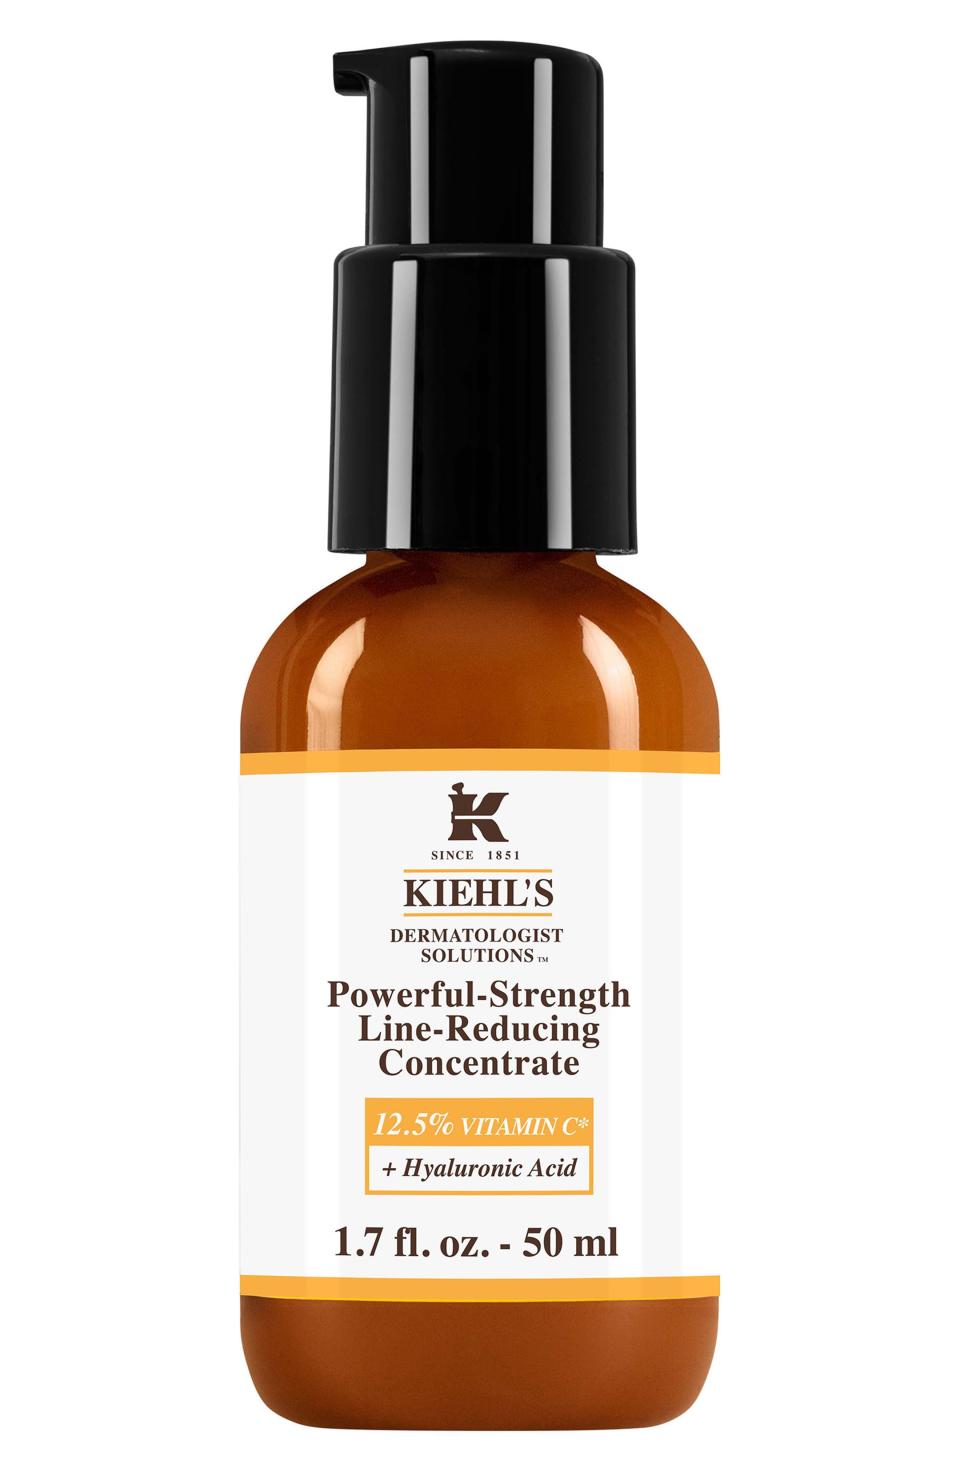 15) Powerful-Strength Line-Reducing Concentrate Serum